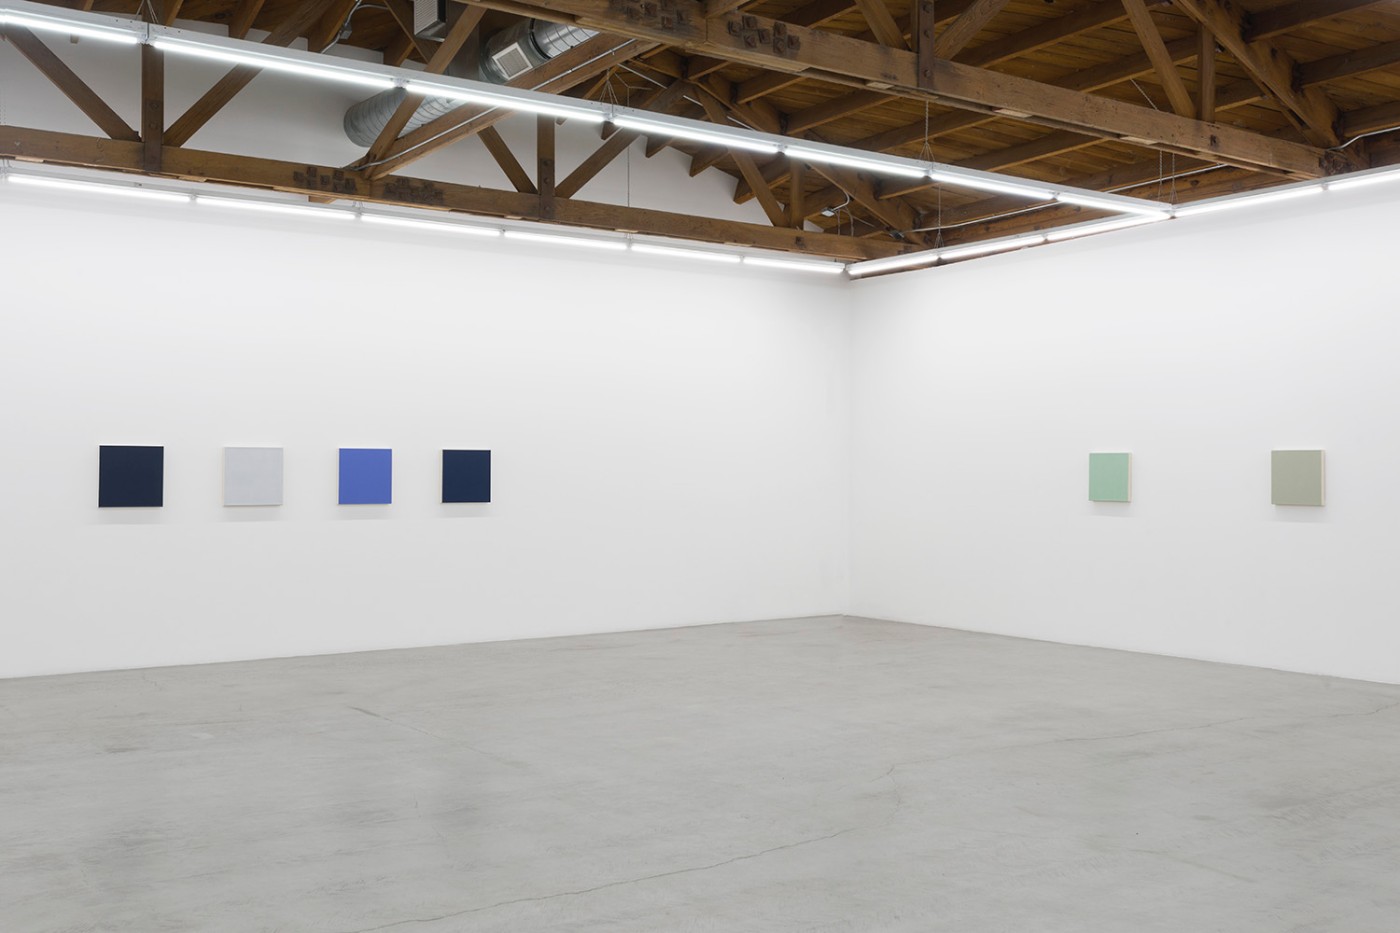 Installation image for Marcia Hafif: Paintings, 2000 - 2014, at parrasch heijnen